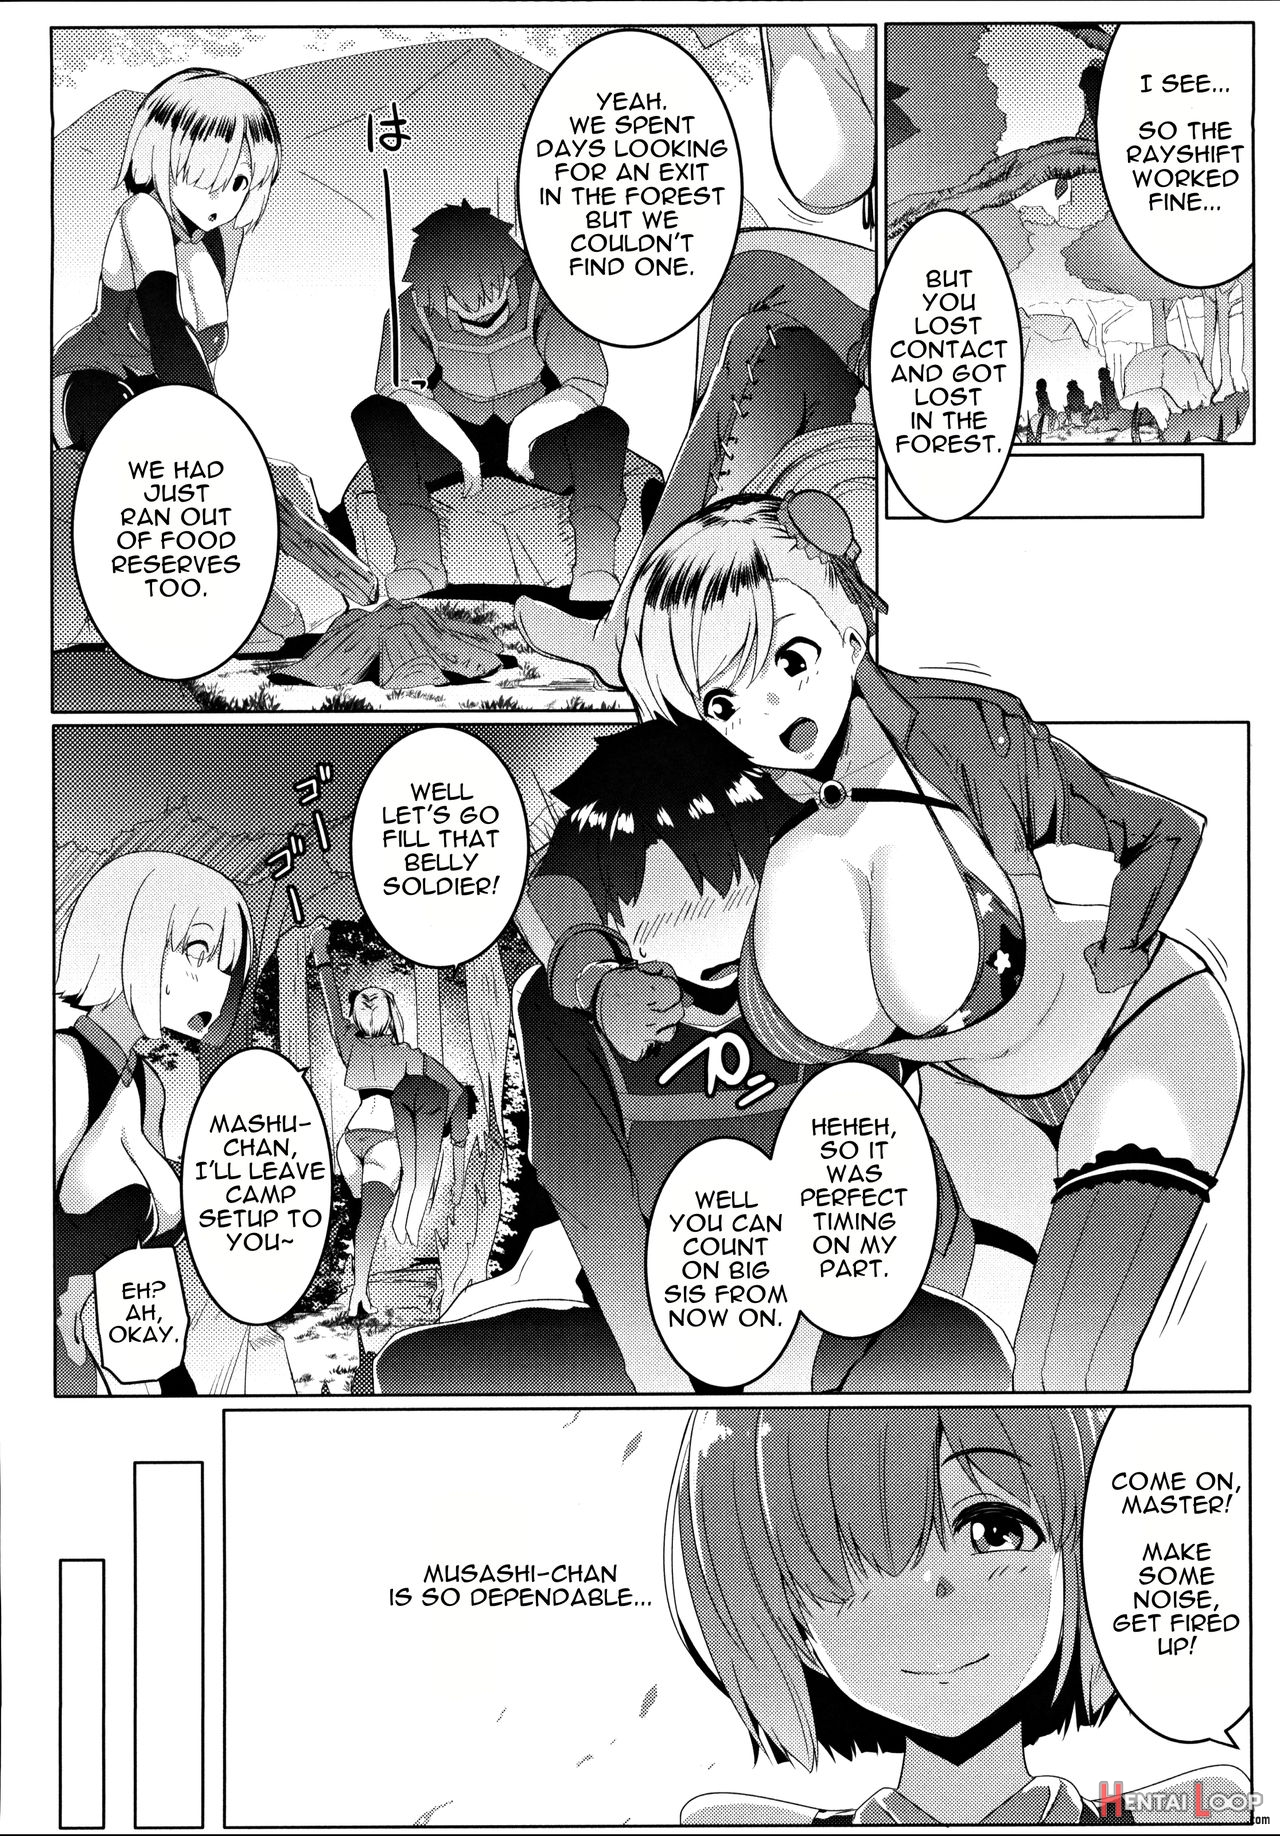 Musashi-chan's Fuck Fest page 5